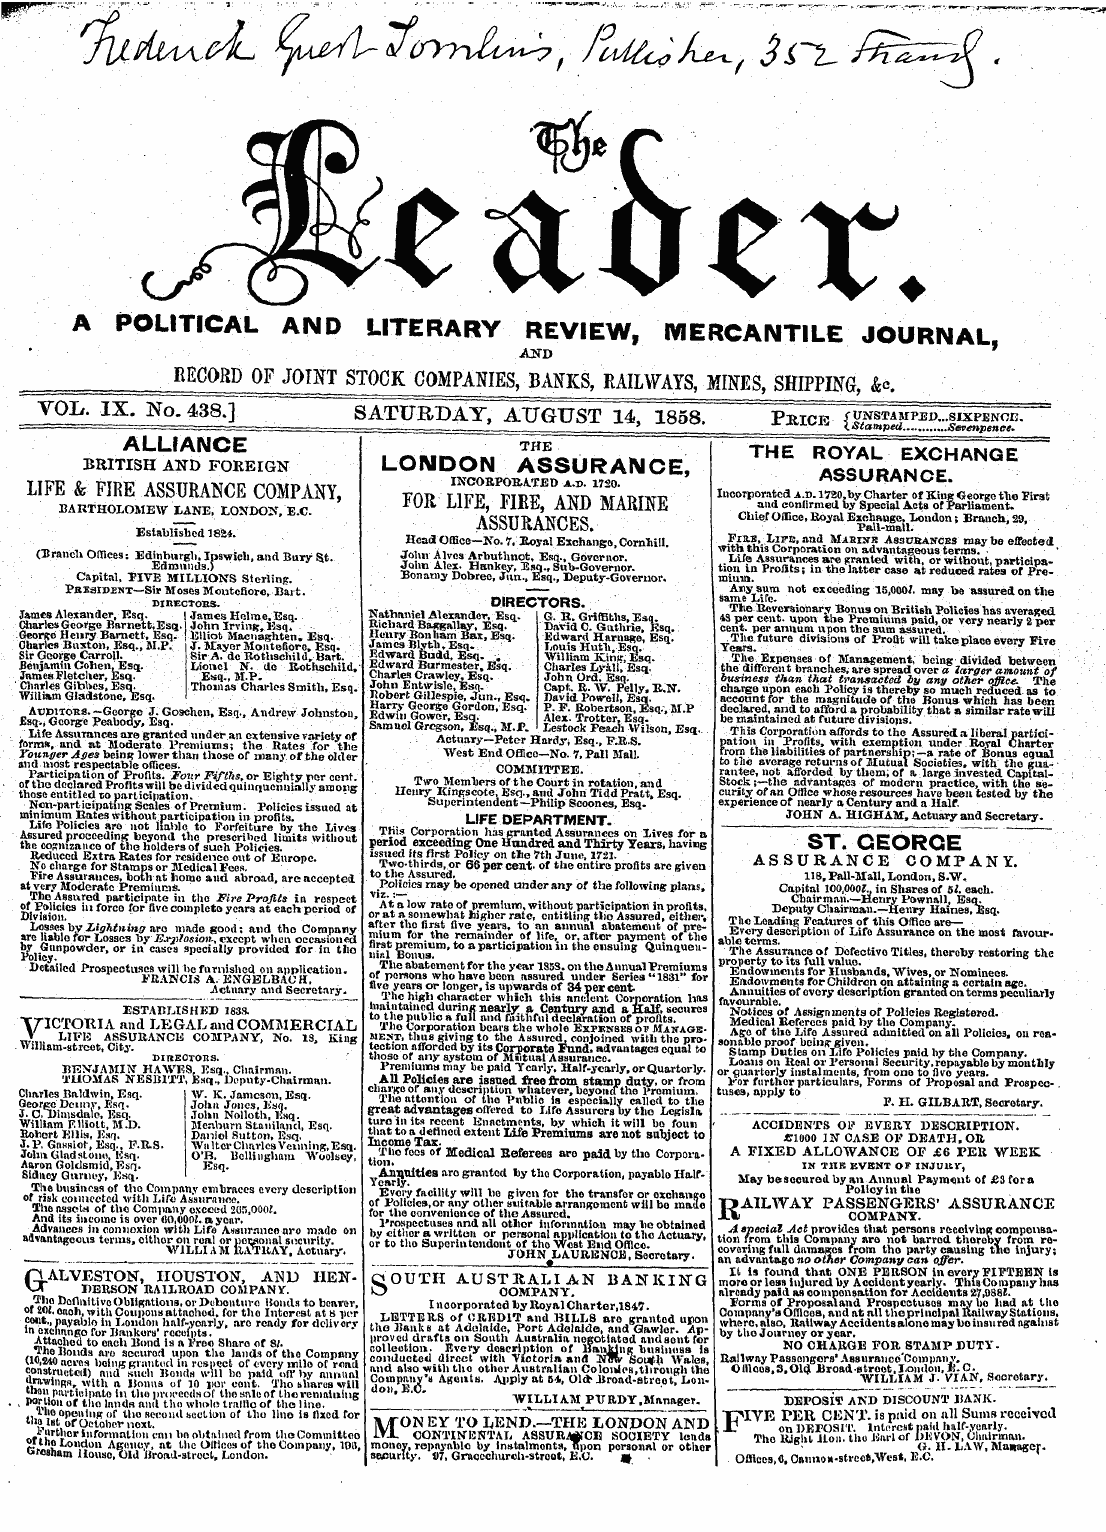 Leader (1850-1860): jS F Y, 2nd edition - Ad00111